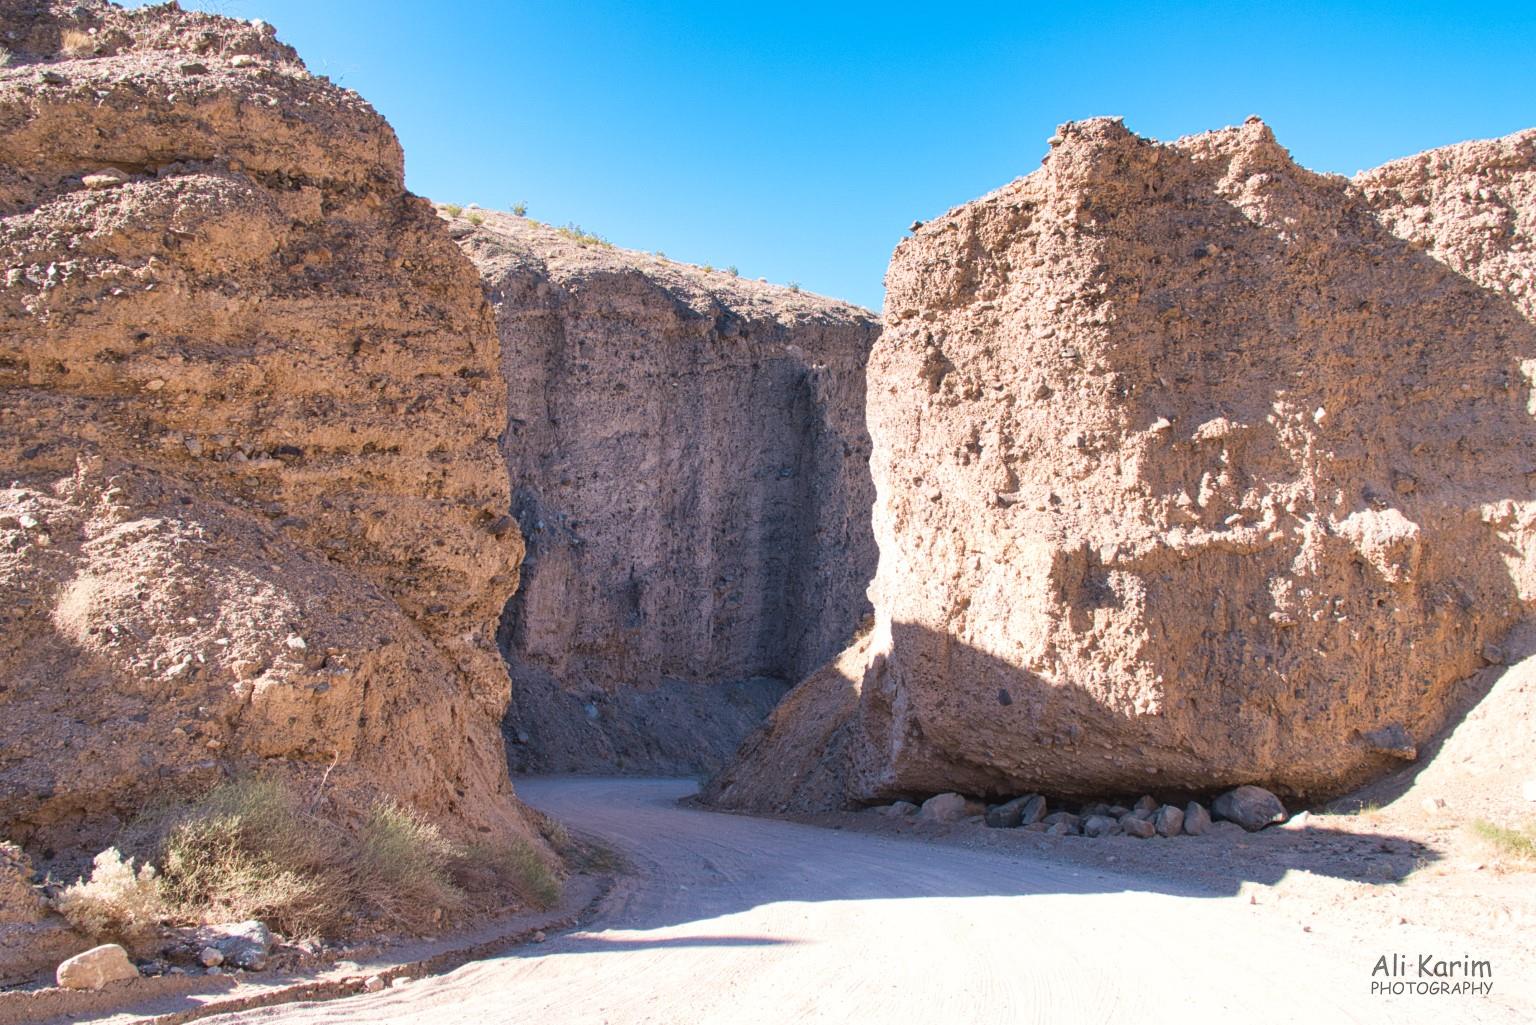 Death Valley National Park, June 2020, Road in canyons carved by flash floods in soft sandstone